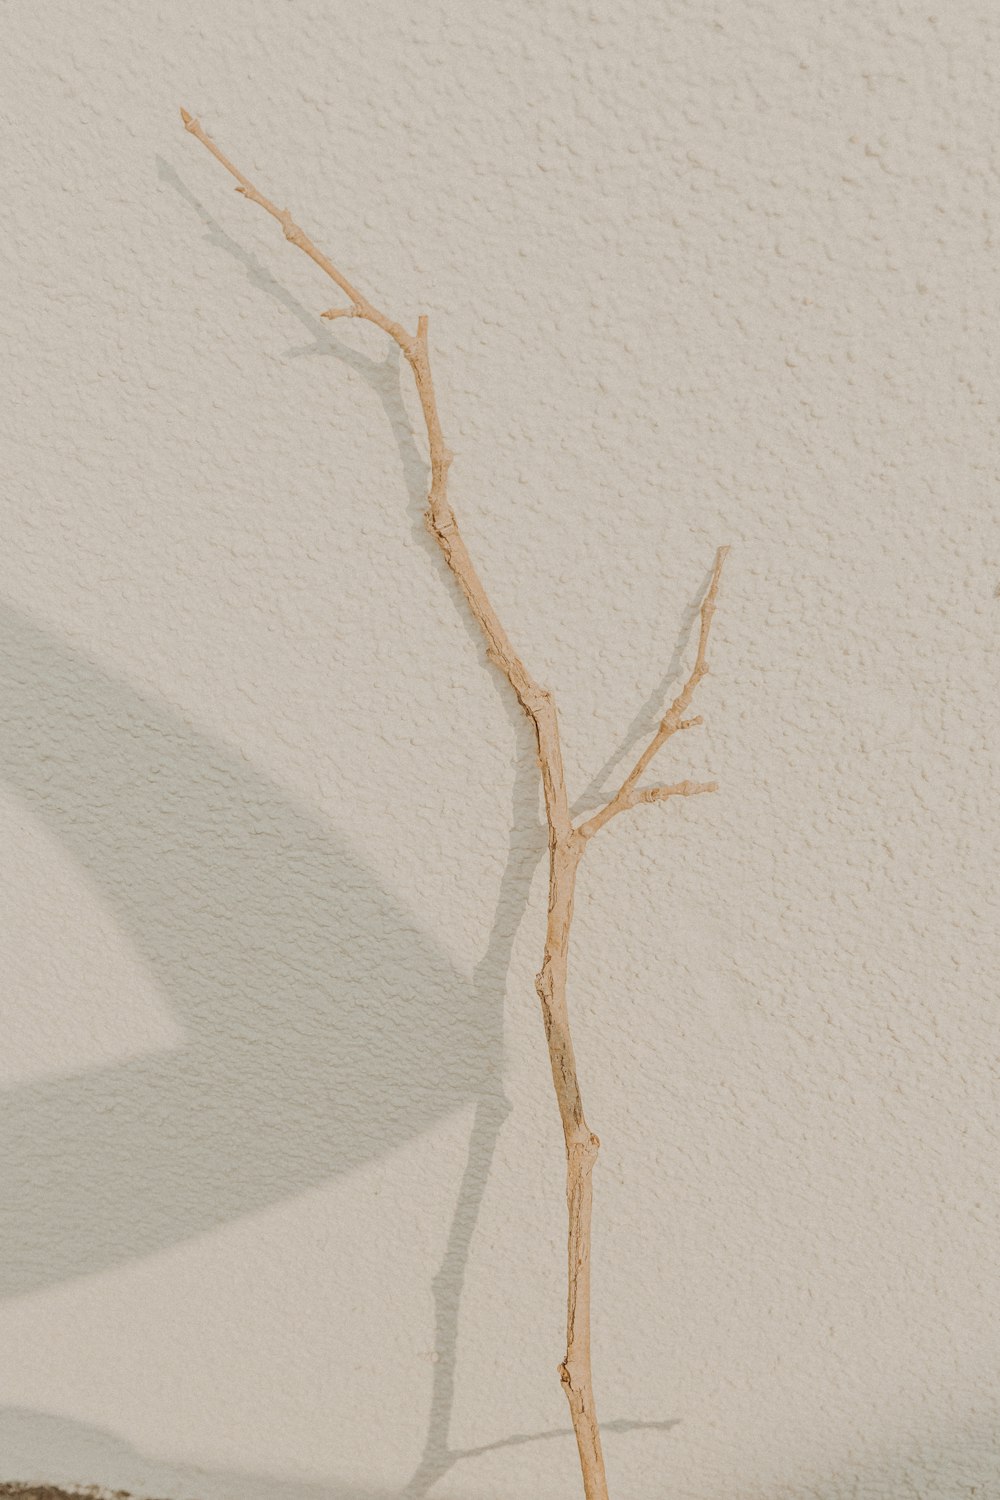 brown tree branch on white painted wall